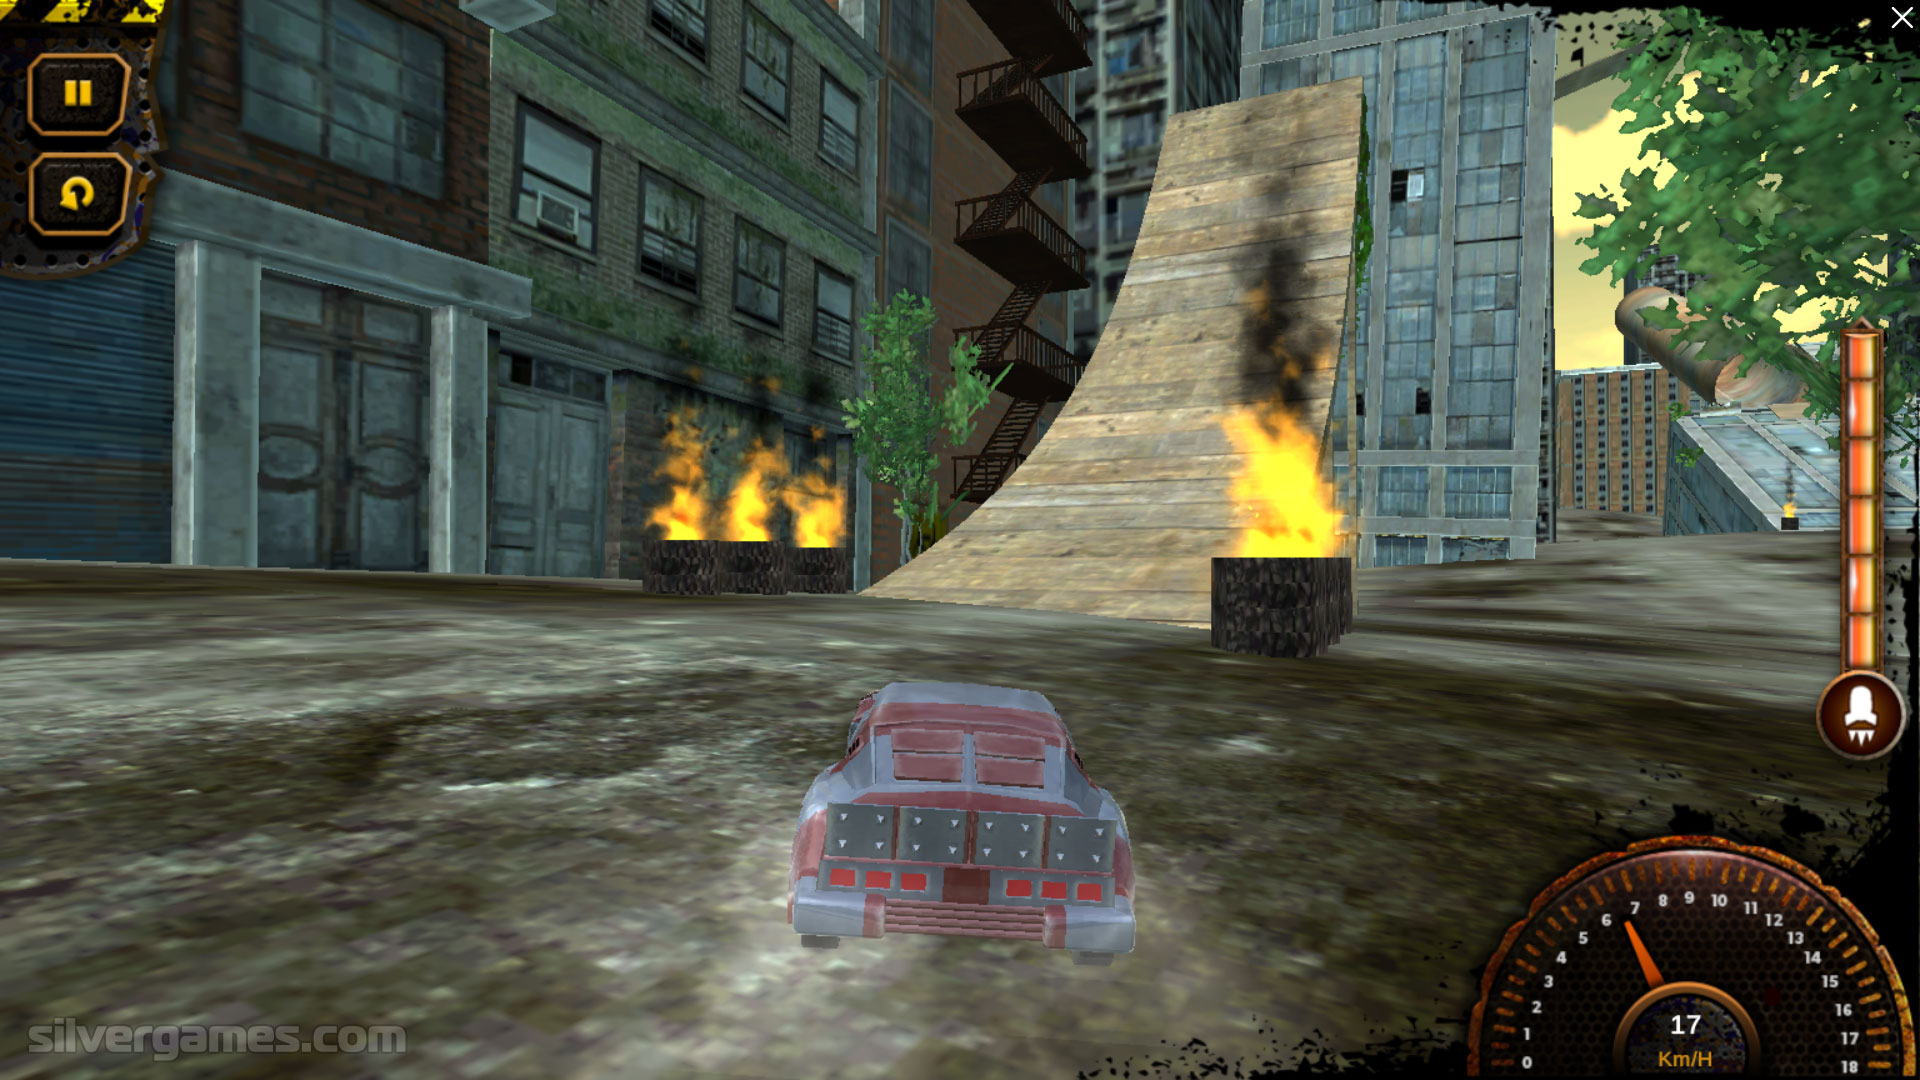 City Stunt Cars for ipod download